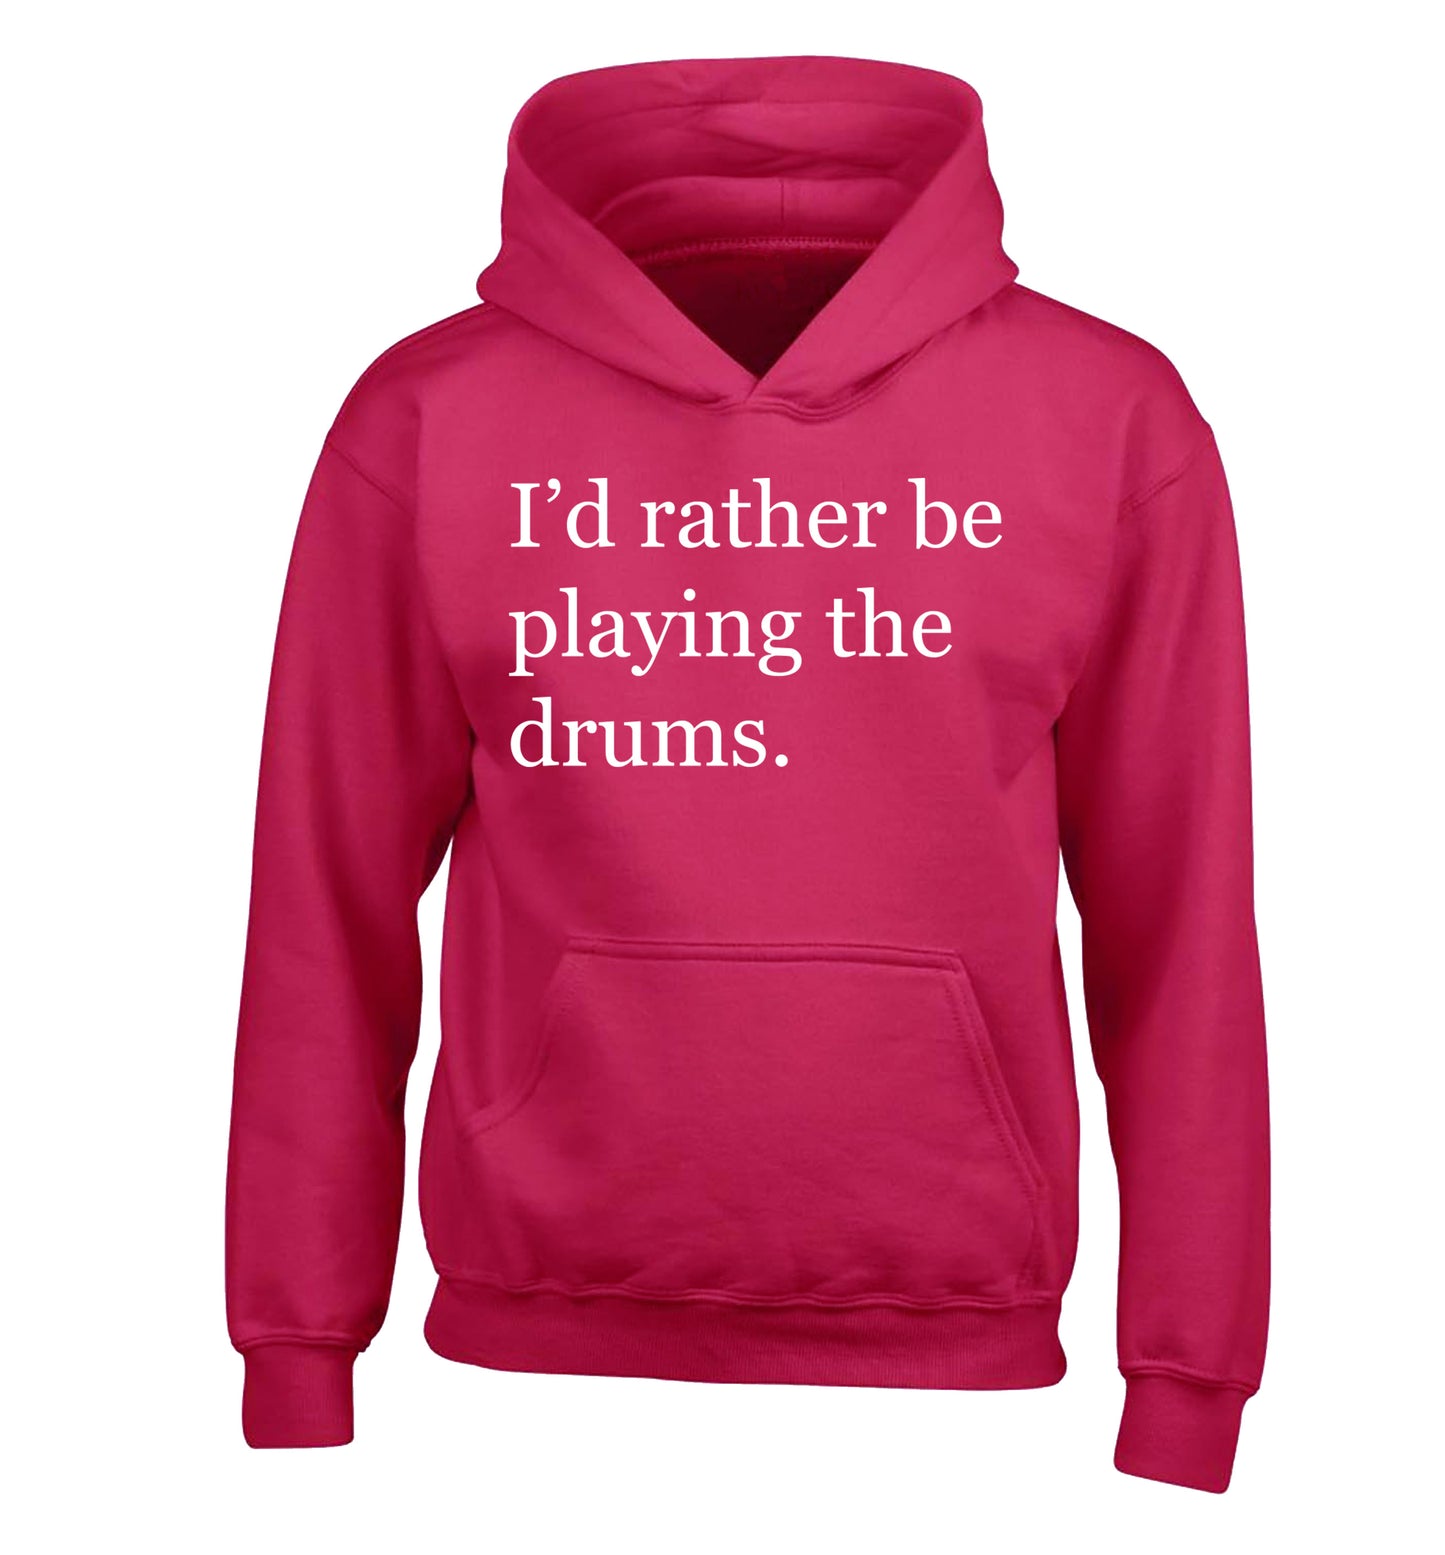 I'd rather be playing the drums children's pink hoodie 12-14 Years